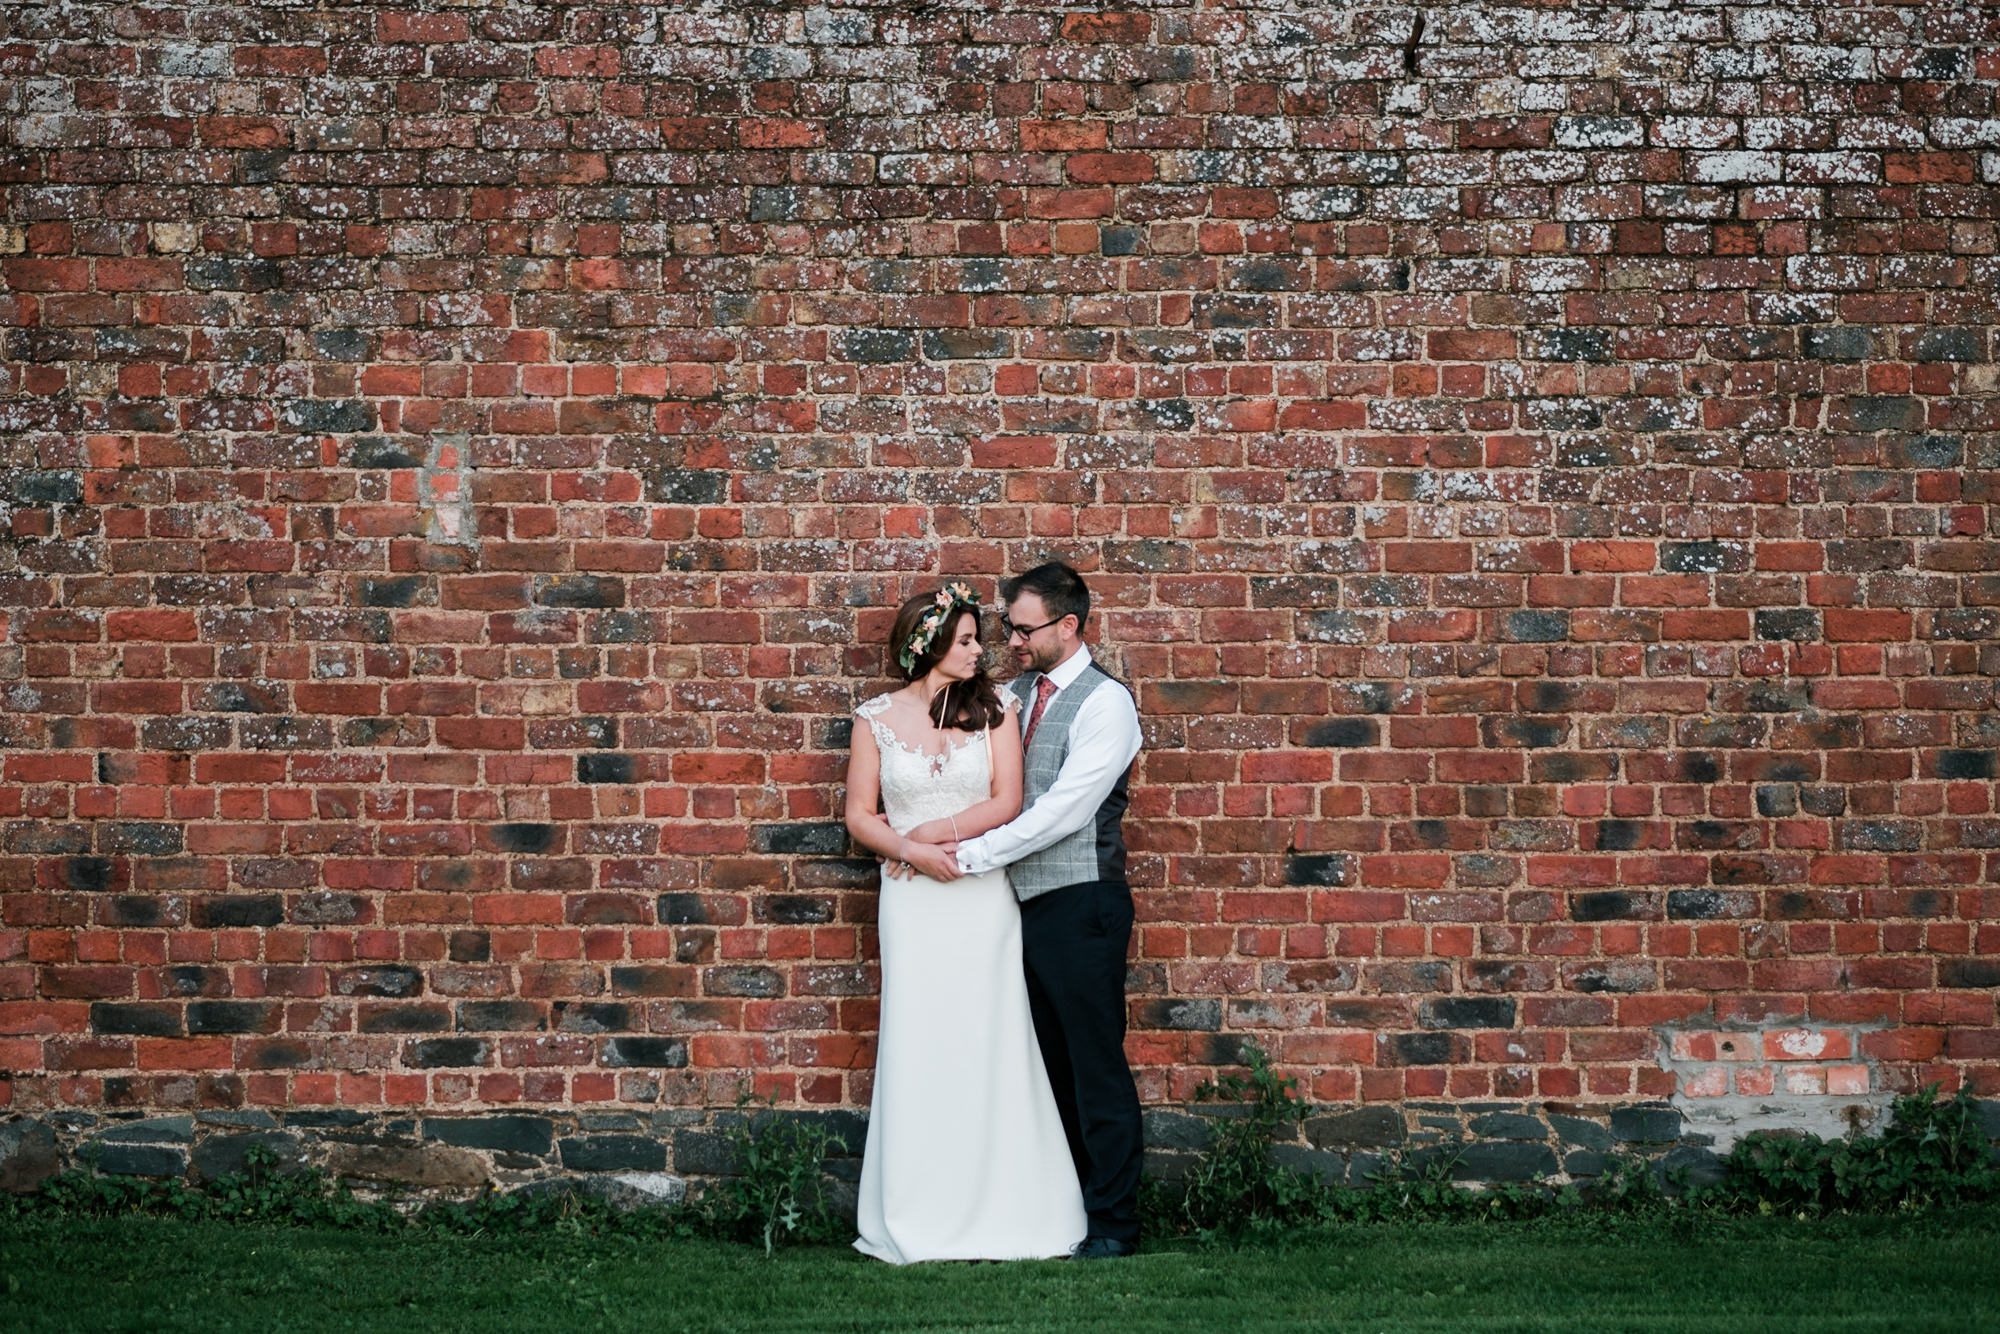 portrait of bride and groom with brick background